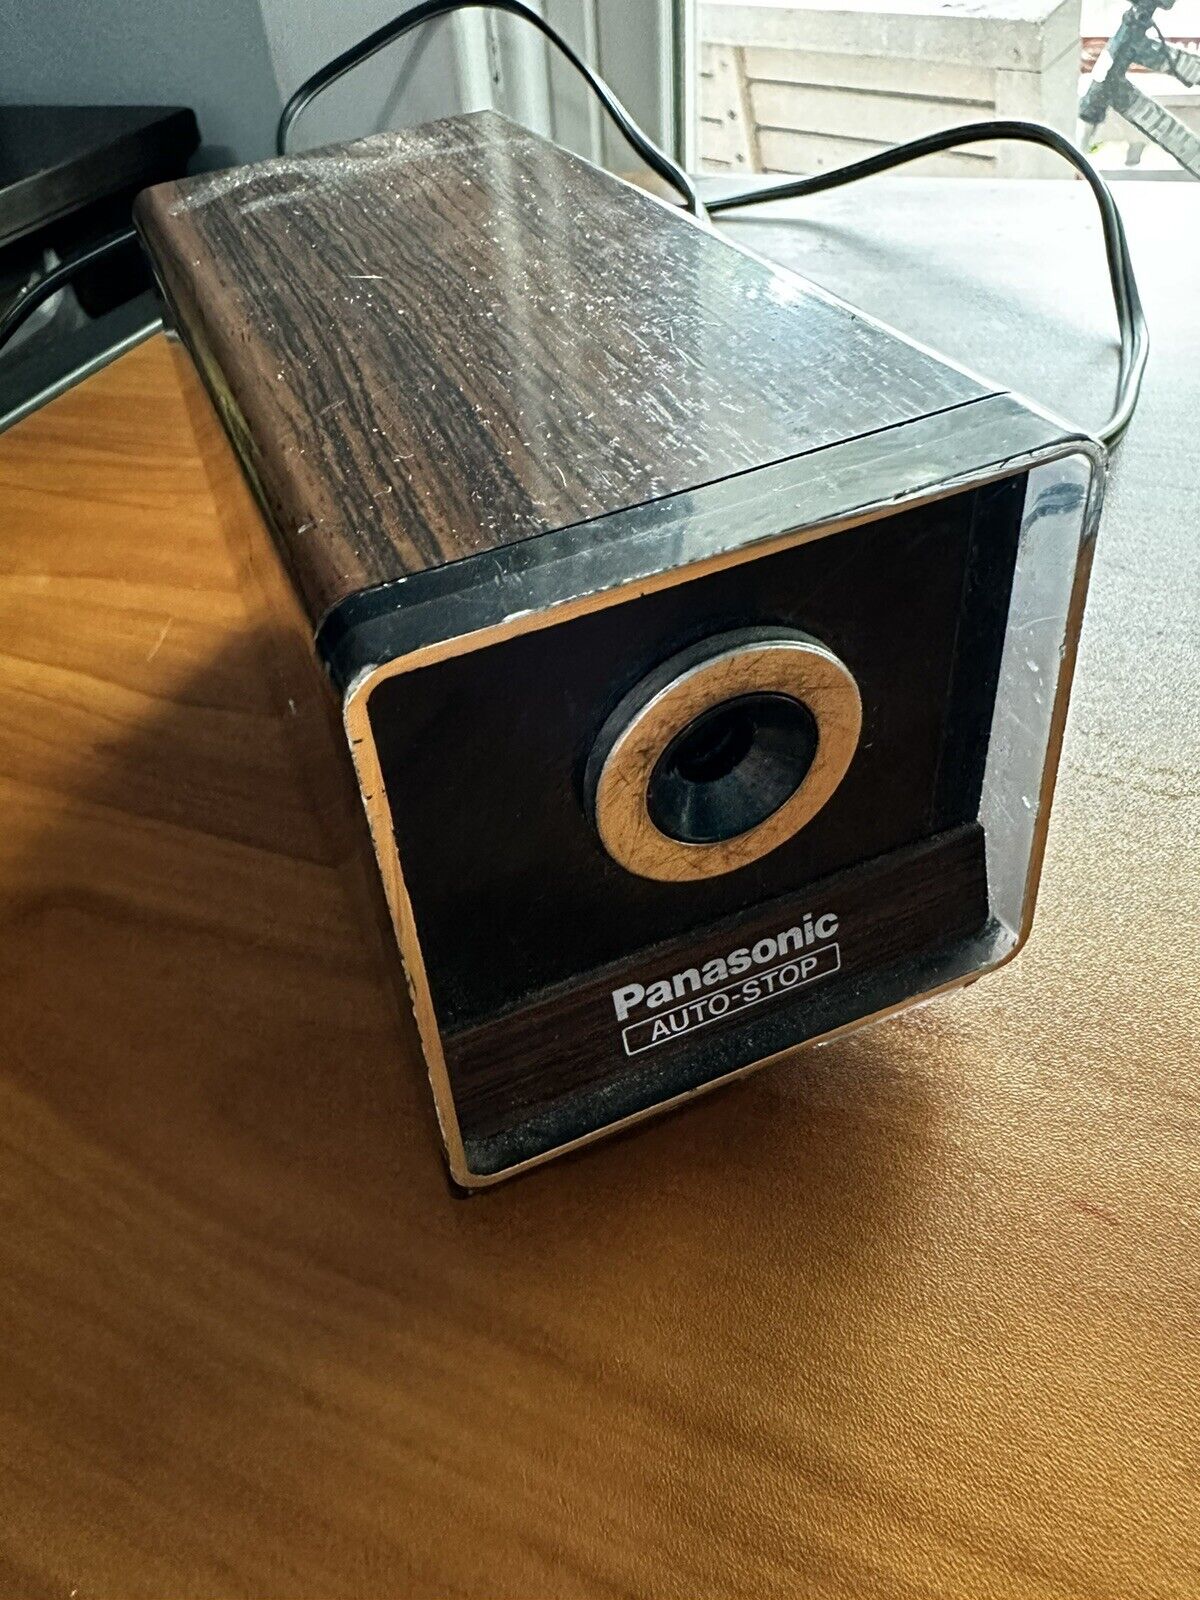 Vintage Panasonic Electric Pencil Sharpener KP-120 With Auto Stop Tested/Working